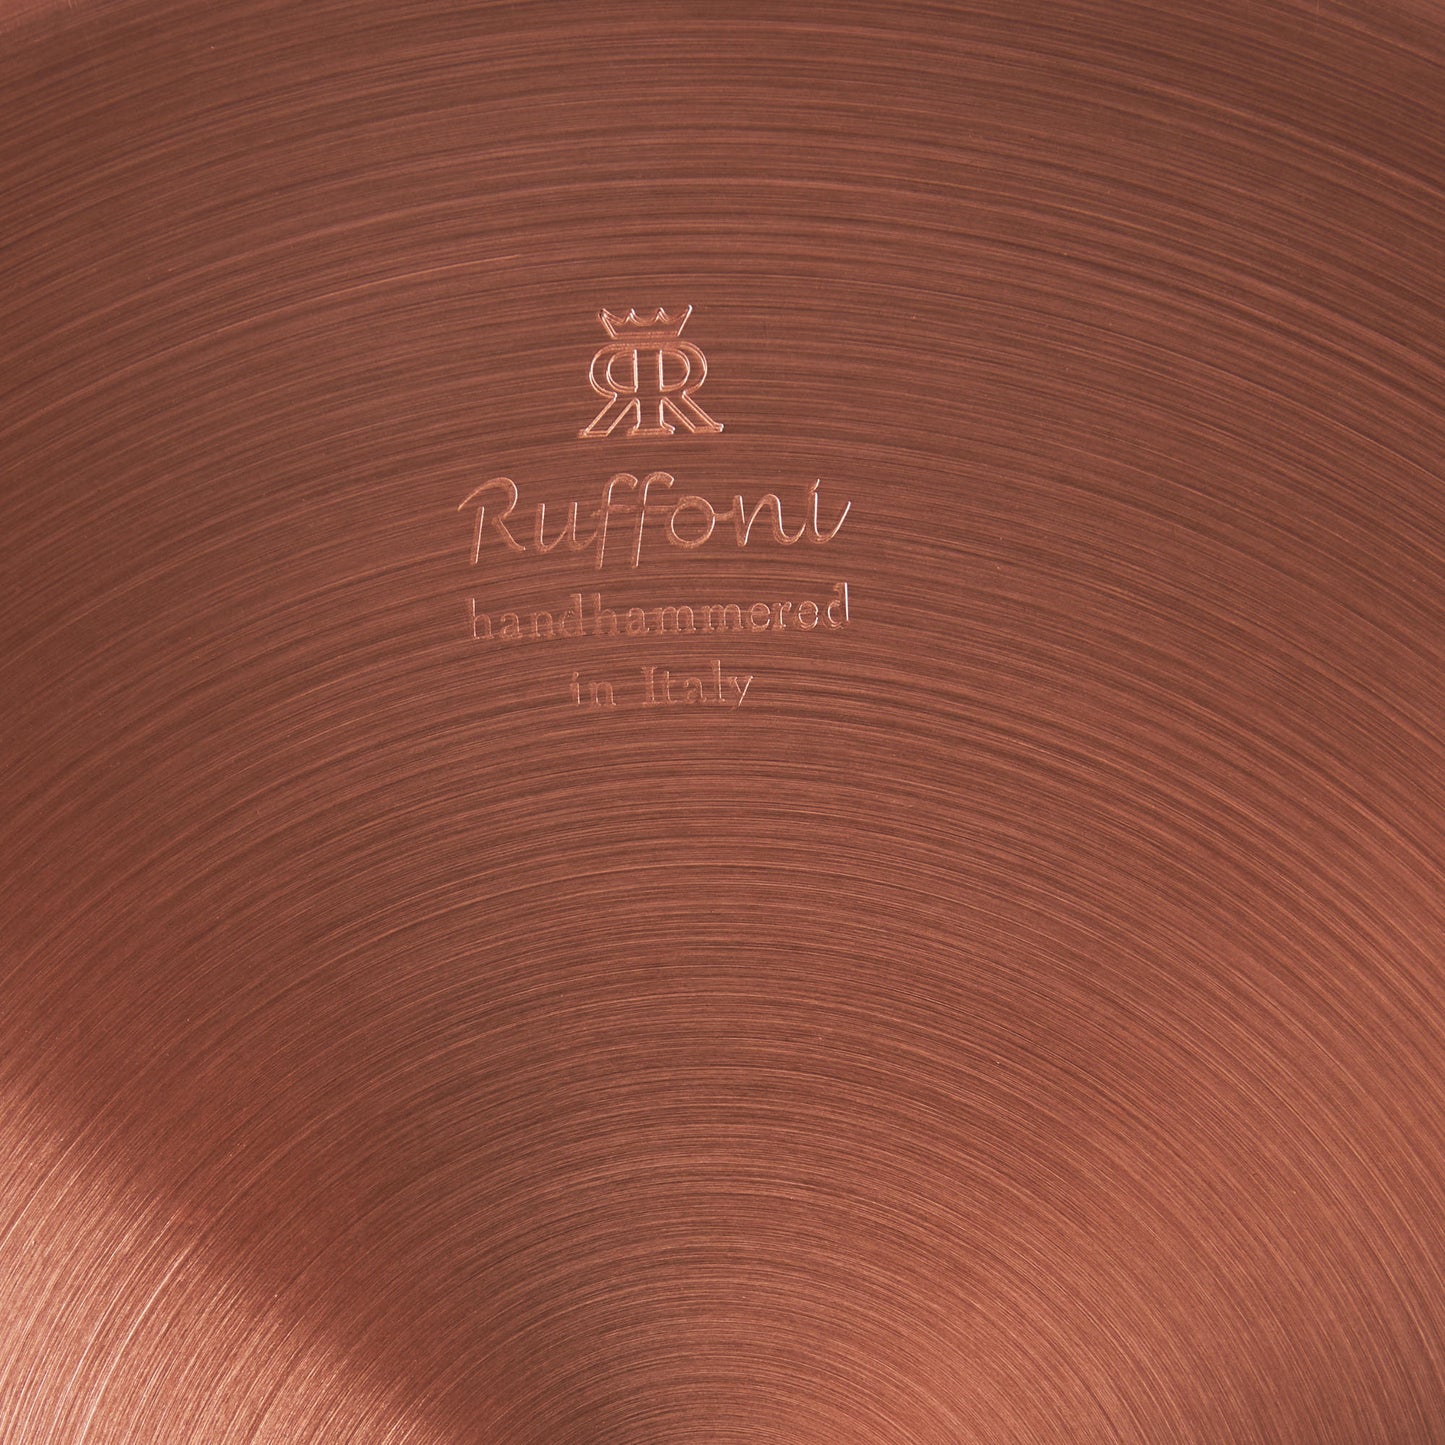 Ruffoni Made in Italy brand logo stamped under copper soup pot for authenticity